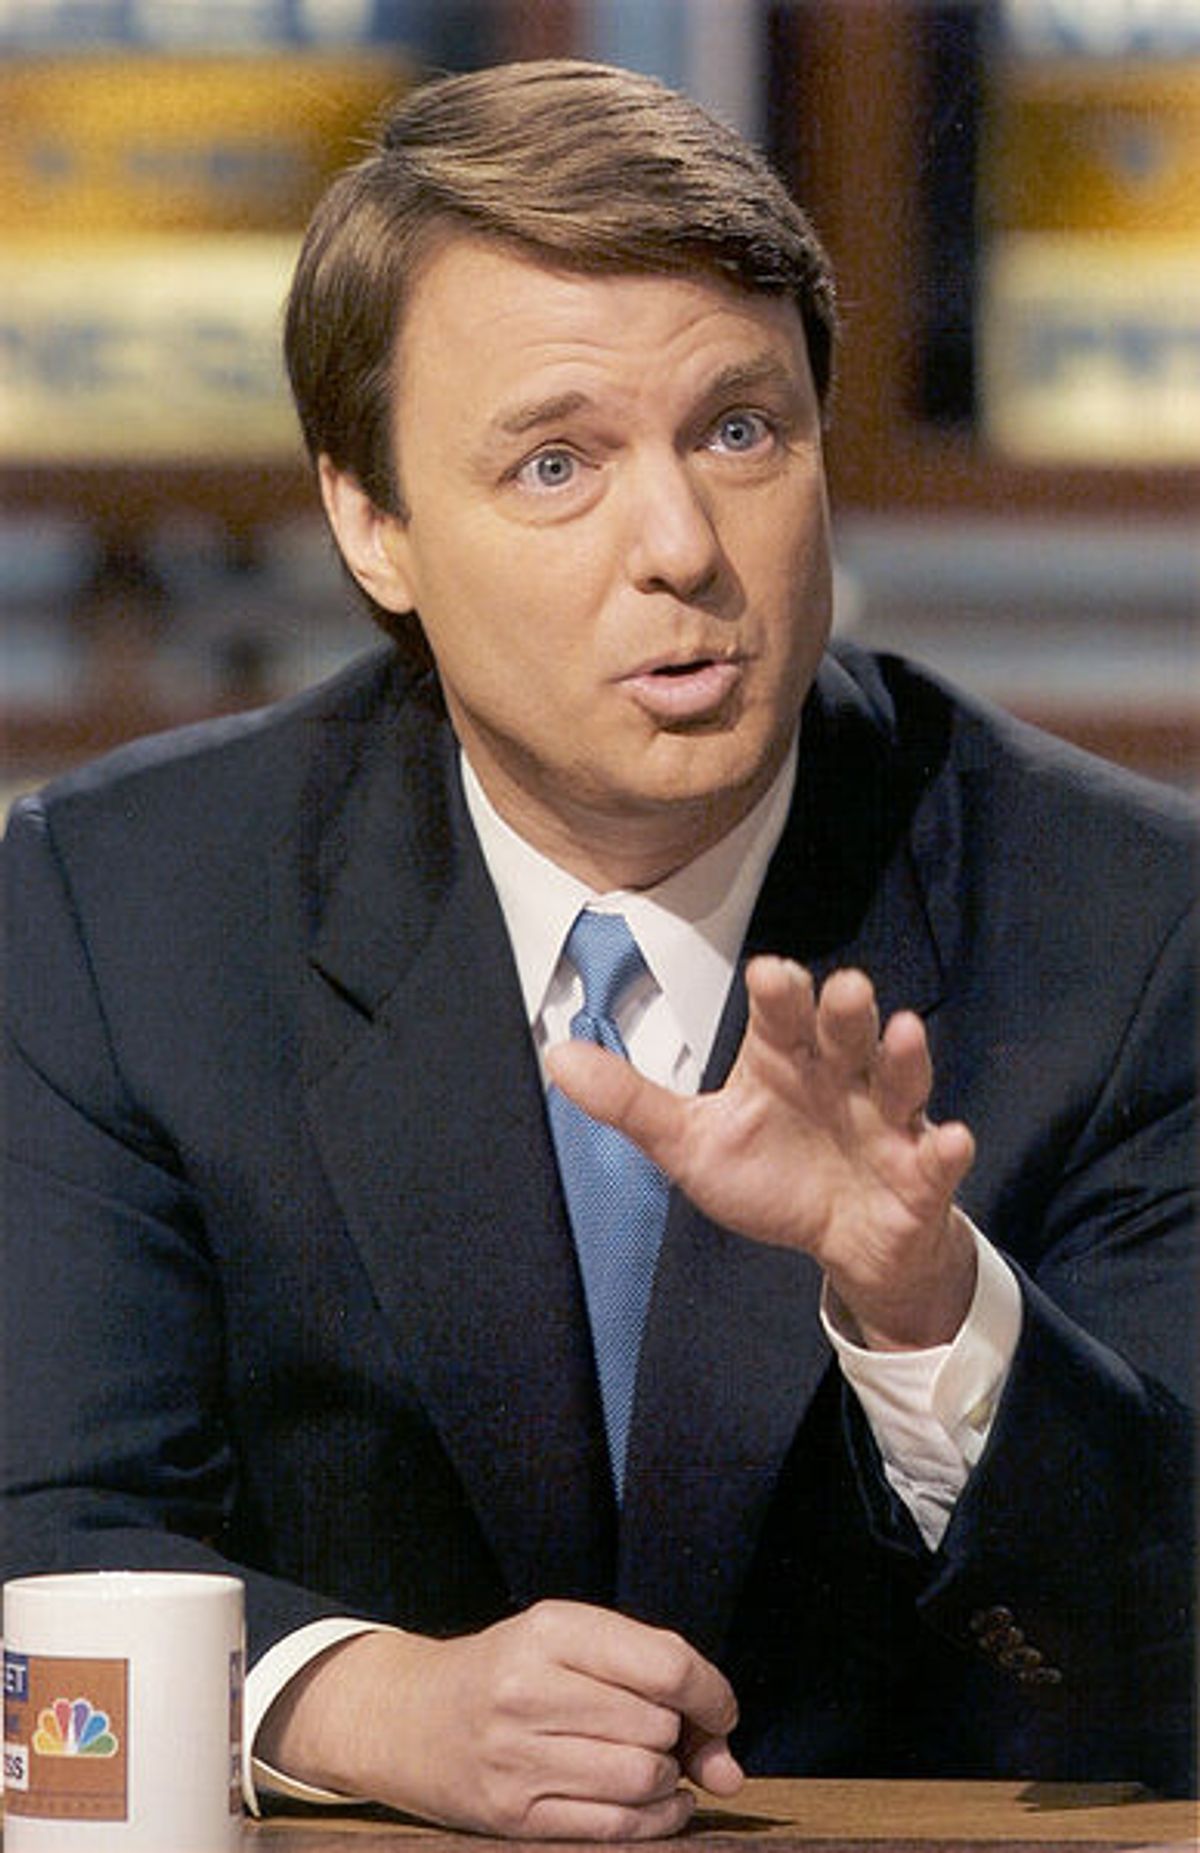 Federal indictment looms for John Edwards